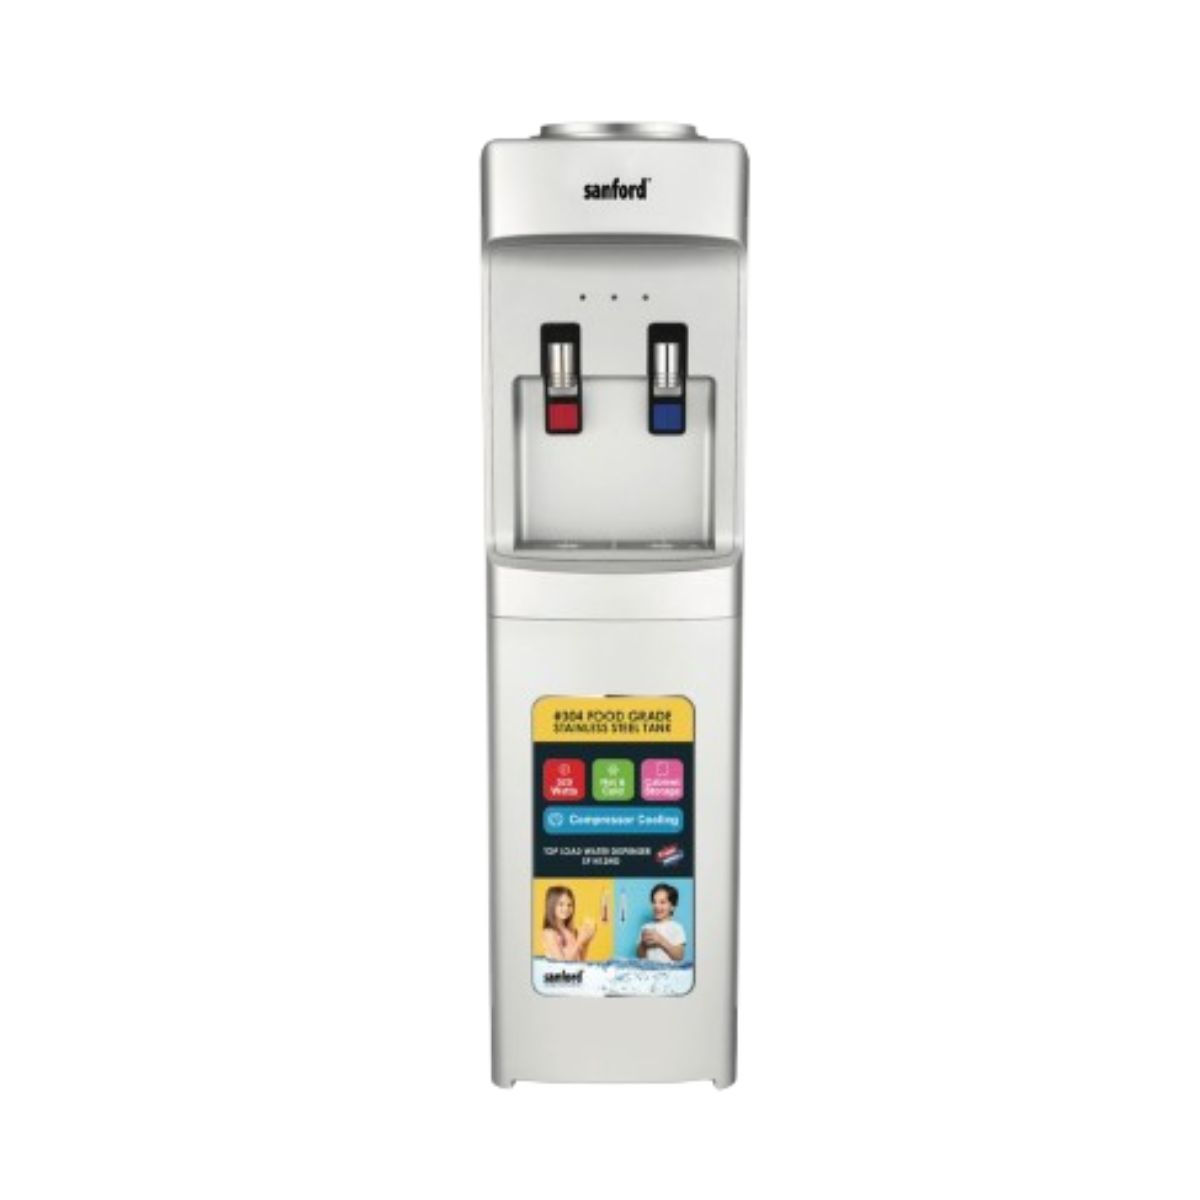 Sanford Hot And Cold Water Dispenser - SF1412WD - White